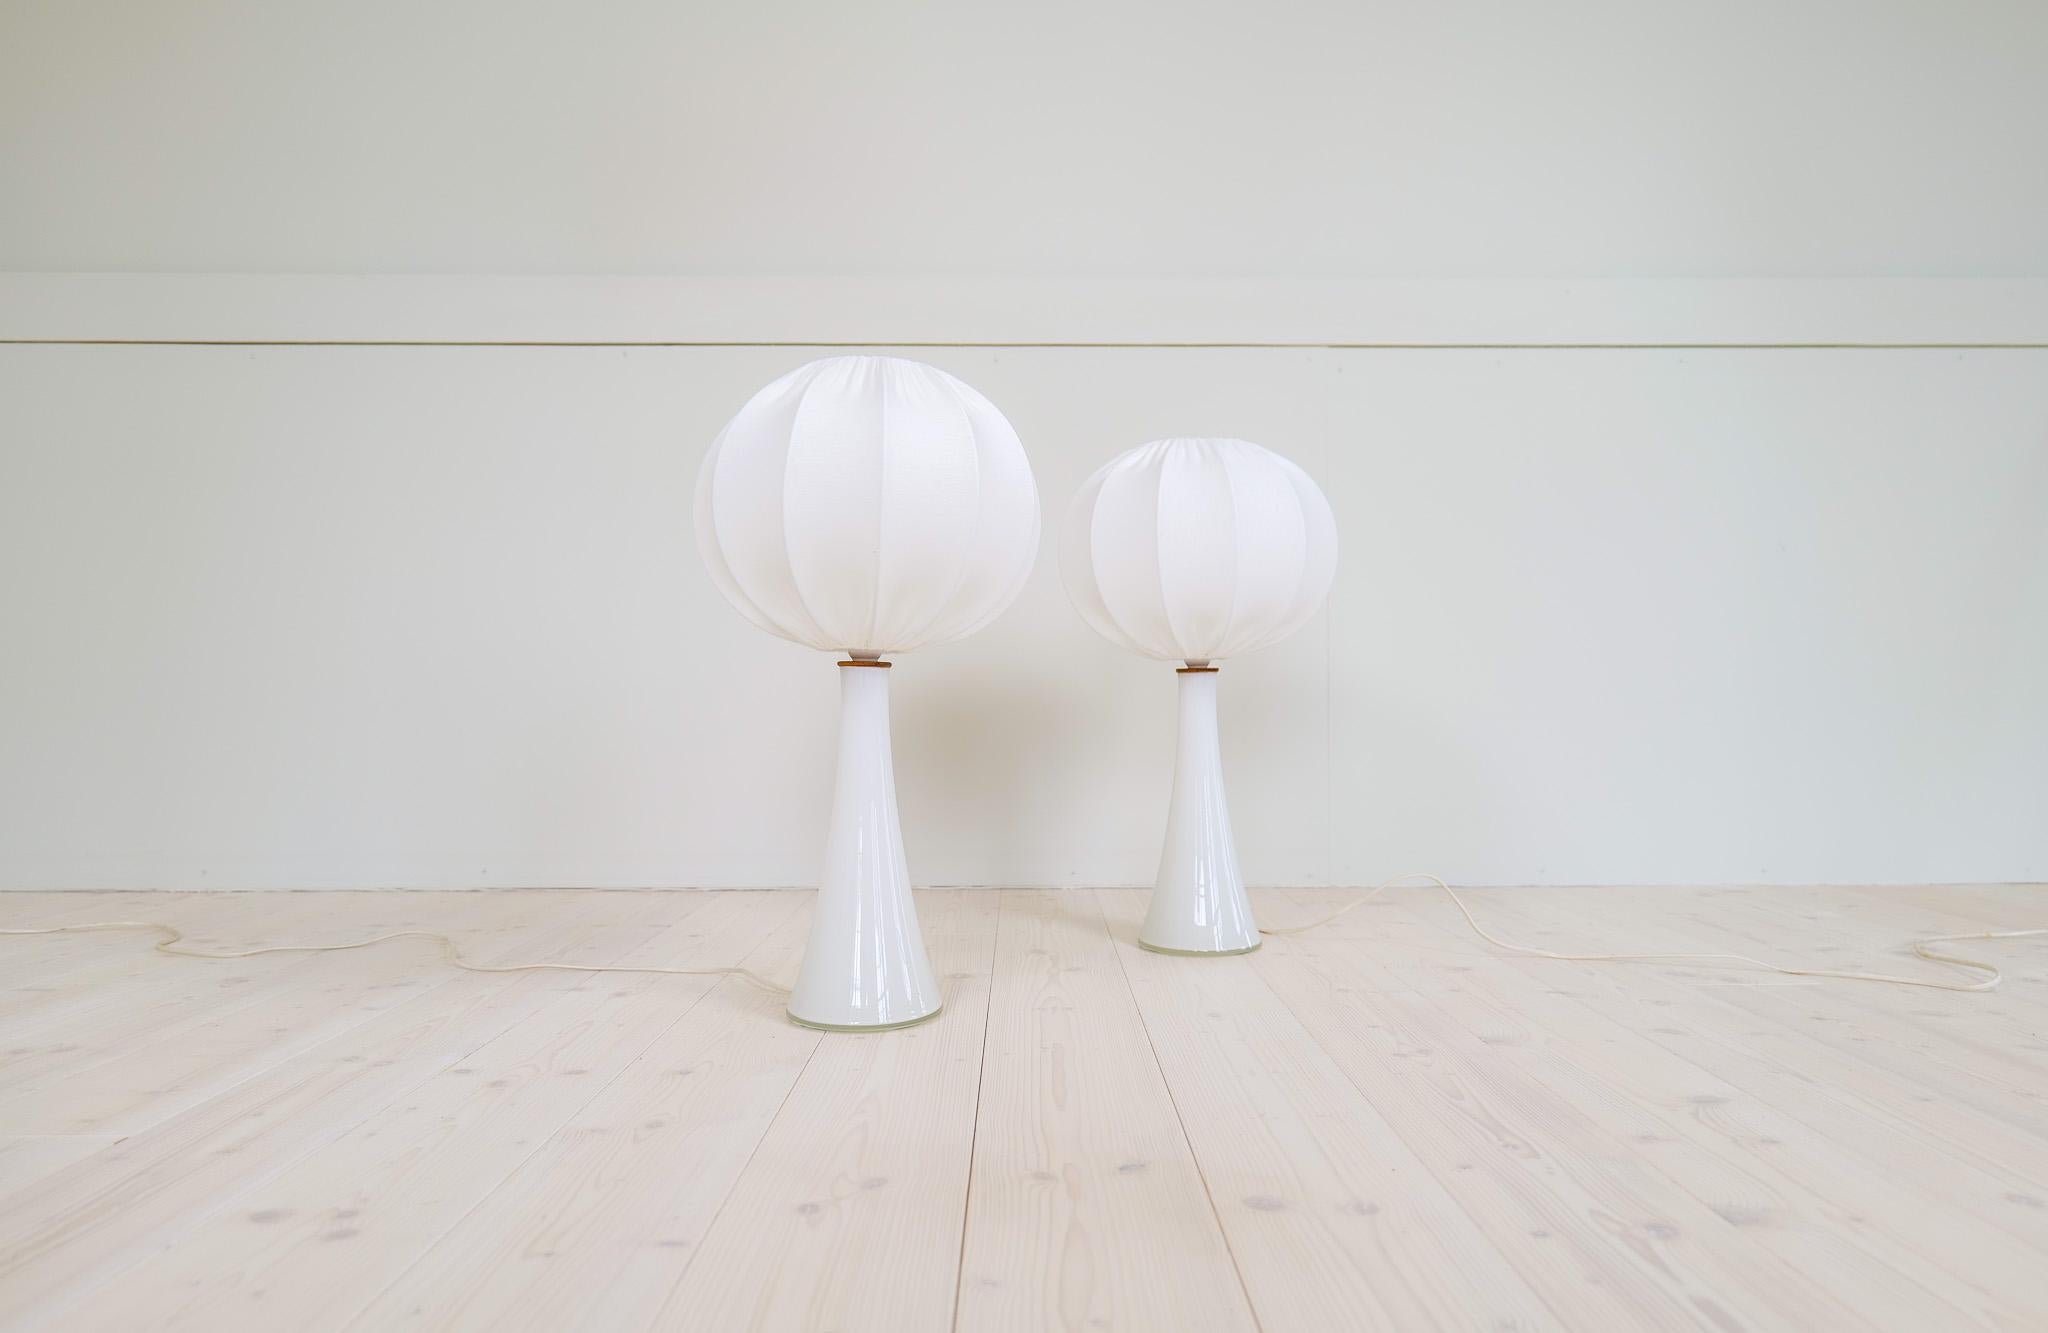 A pair of diabolos shaped Swedish opaline glass table lamps with teak fittings. Designed by Berndt Nordstedt for Bergboms. 

Good working vintage condition. All new cotton shades. 

Dimensions: H 59 cm, W 30 cm, Base 15 cm. Shades H 23 cm Width